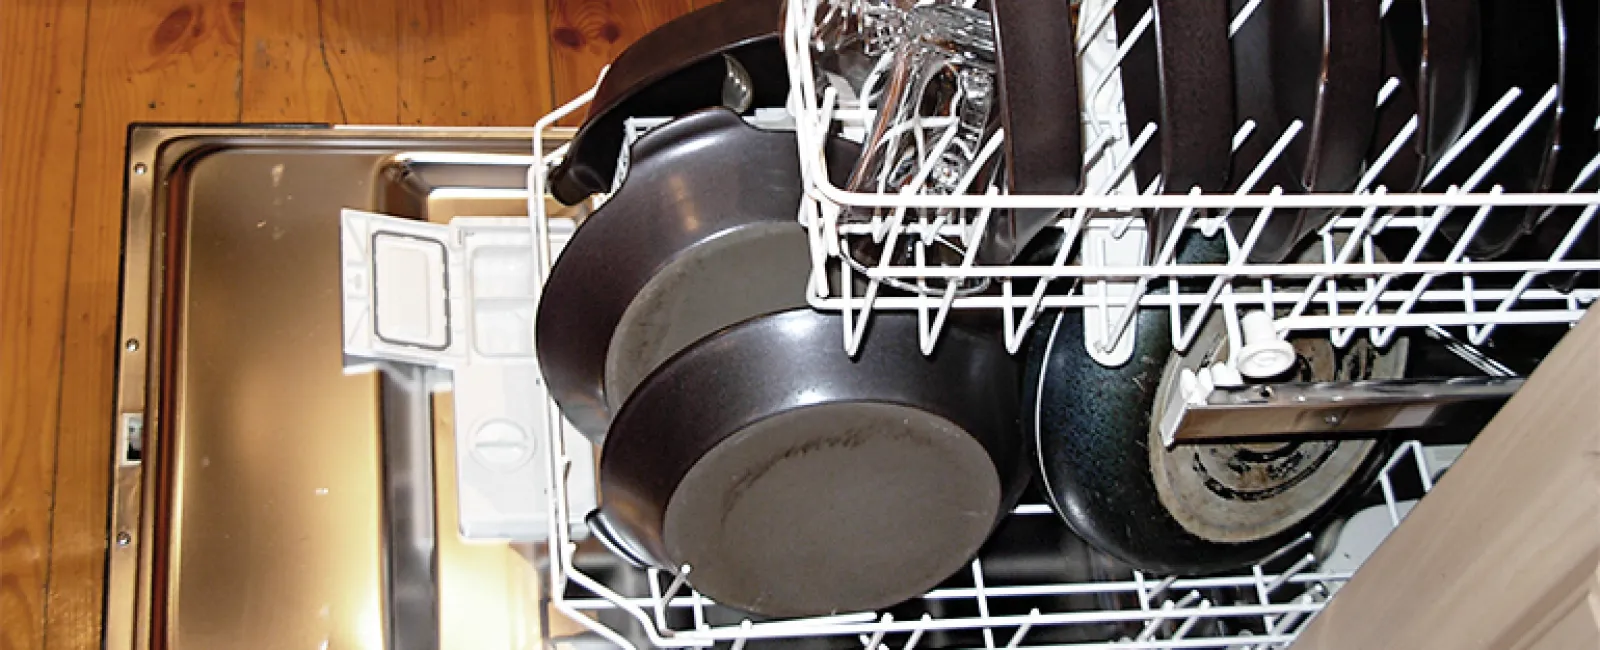 What to Do When Your Dishwasher Does Not Drain